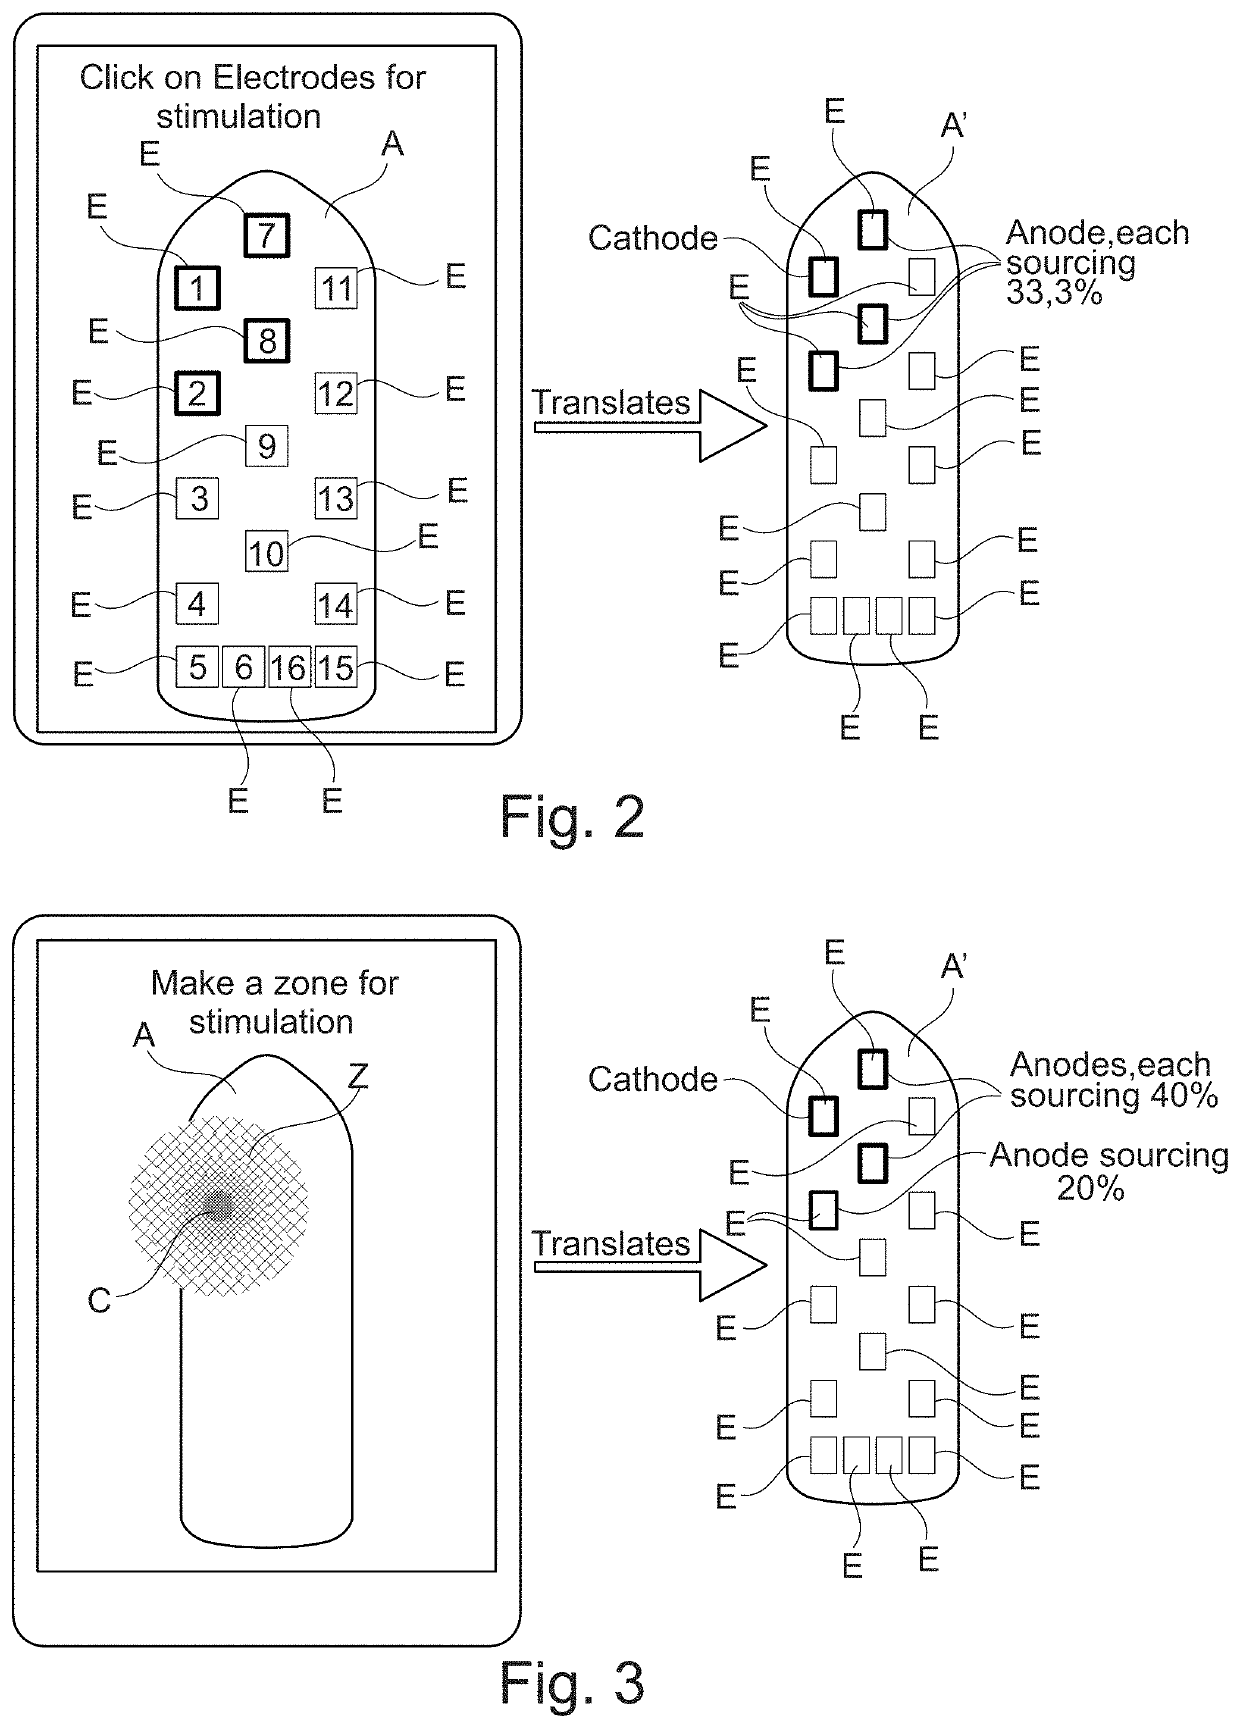 Planning and/or control system for a neuromodulation system